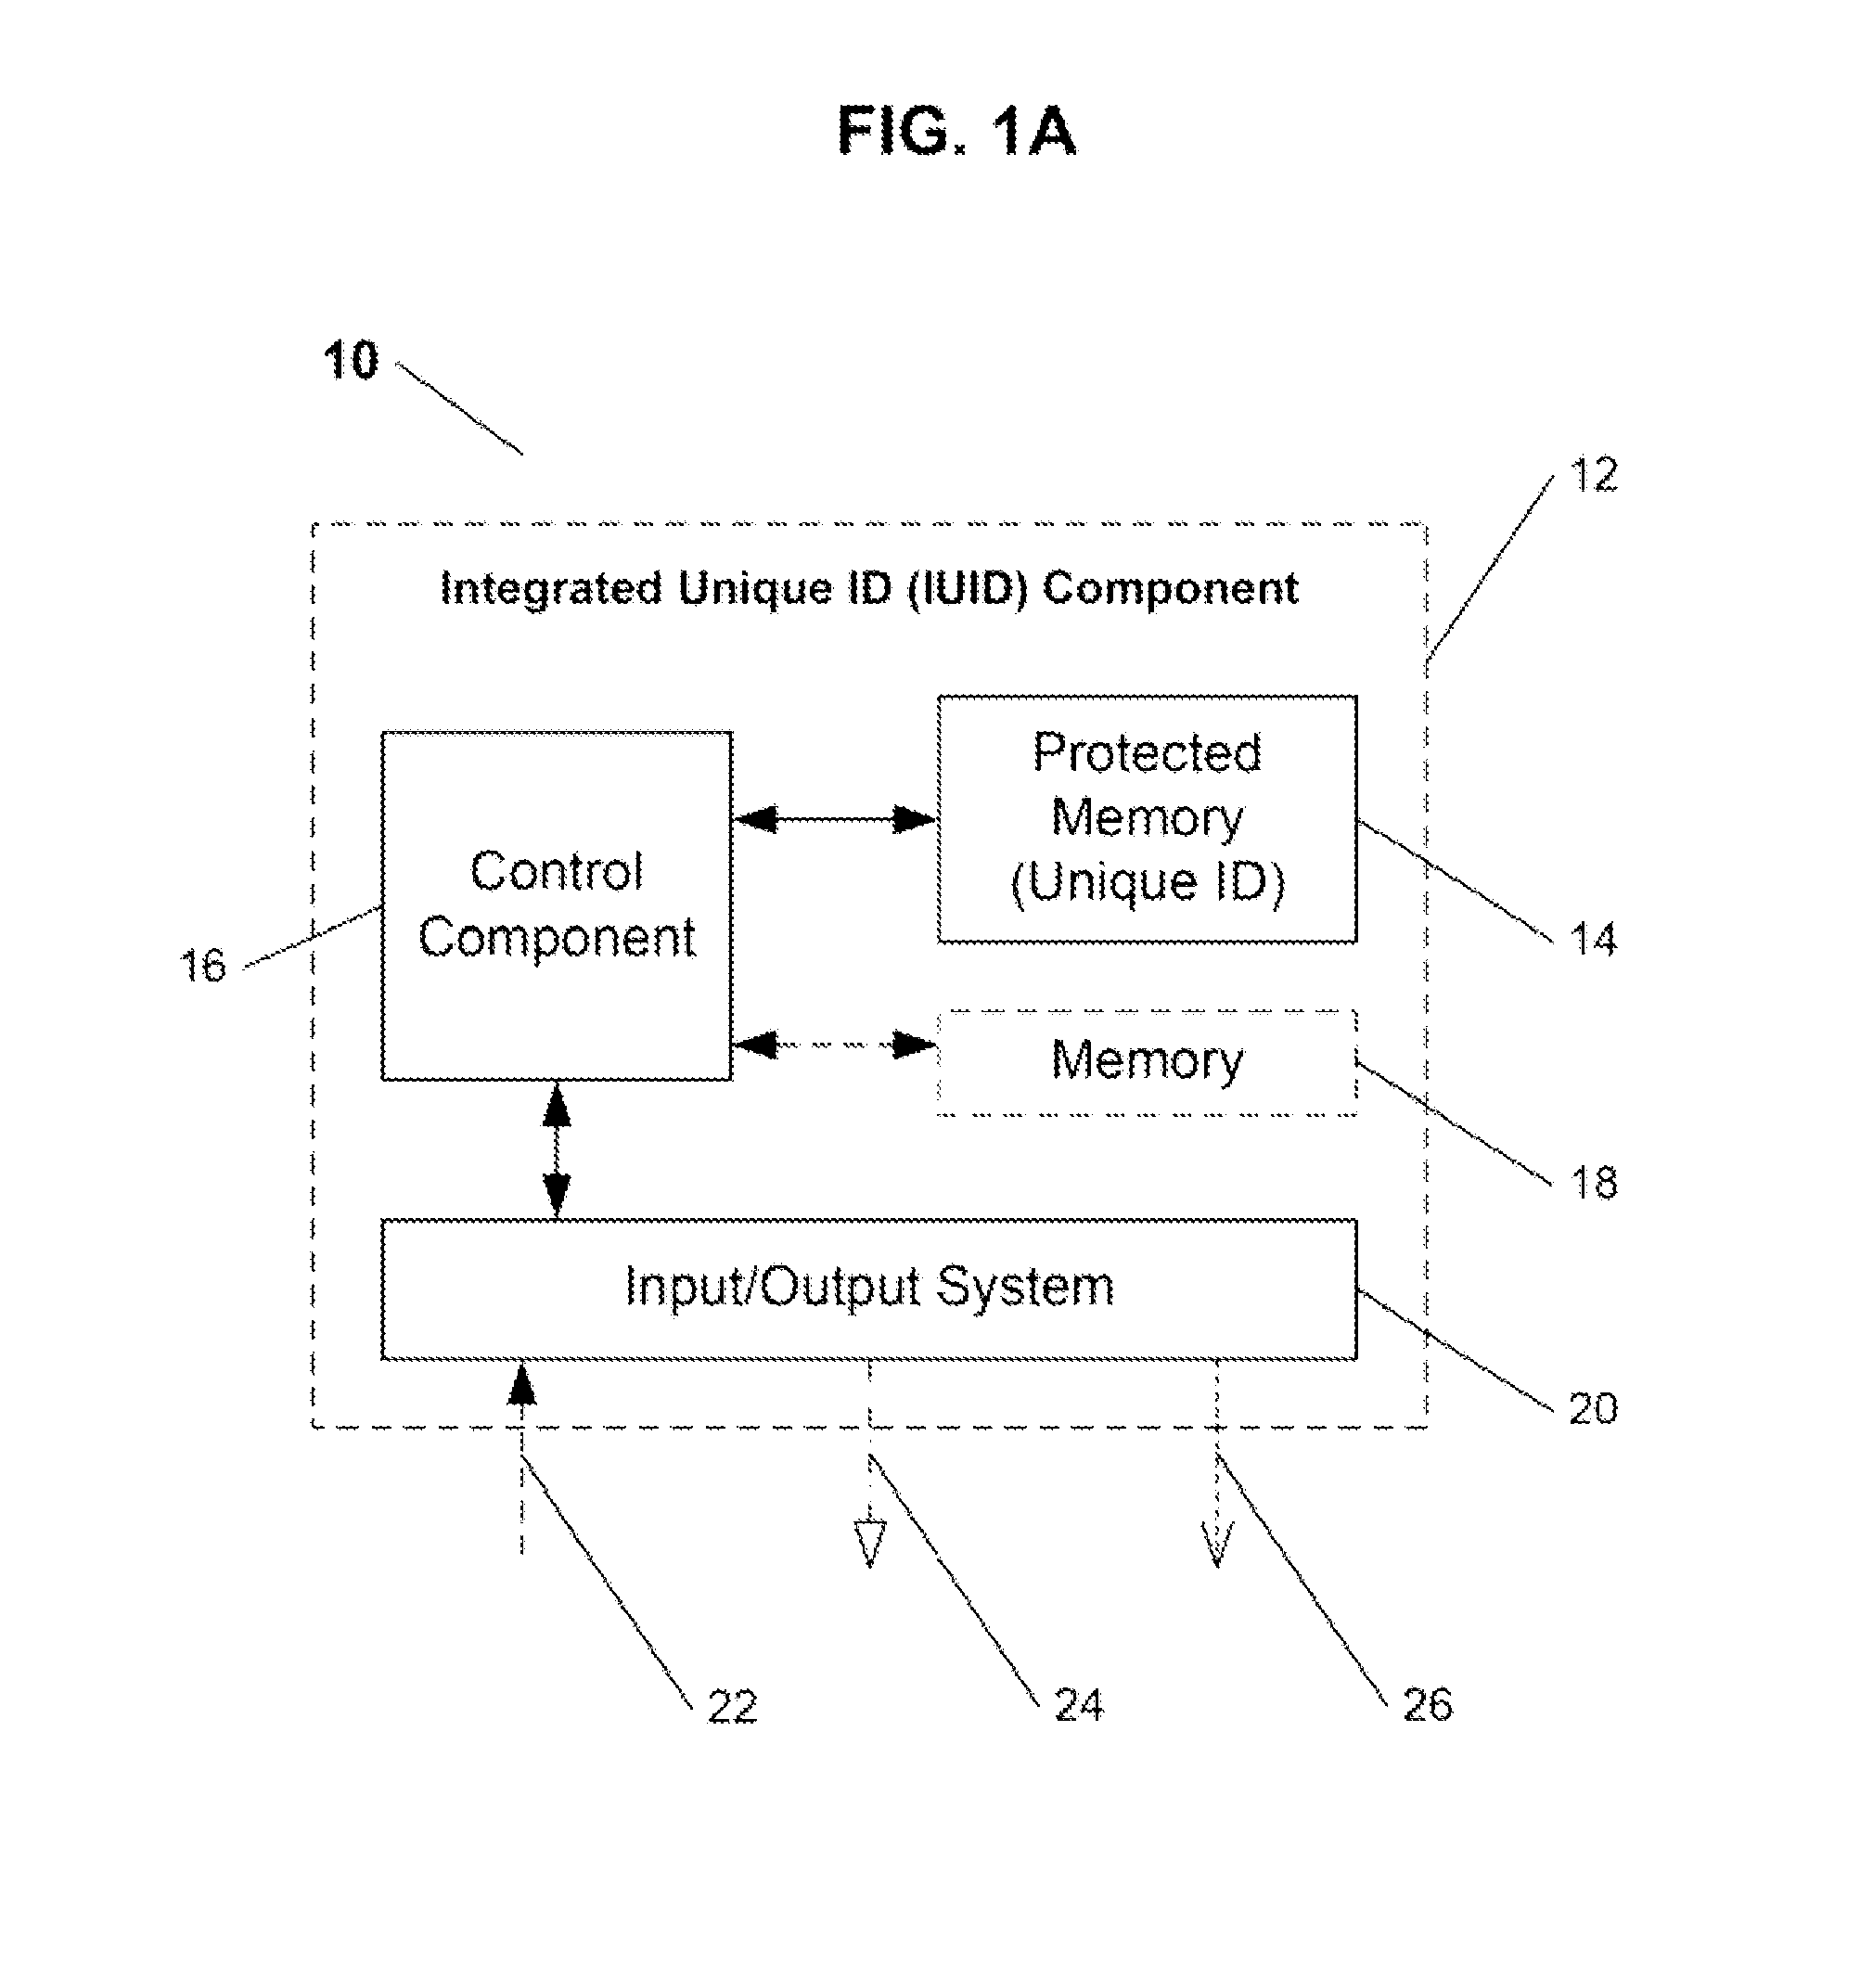 System and method for streamlined registration of products over a communication network and for verification and management of information related thereto